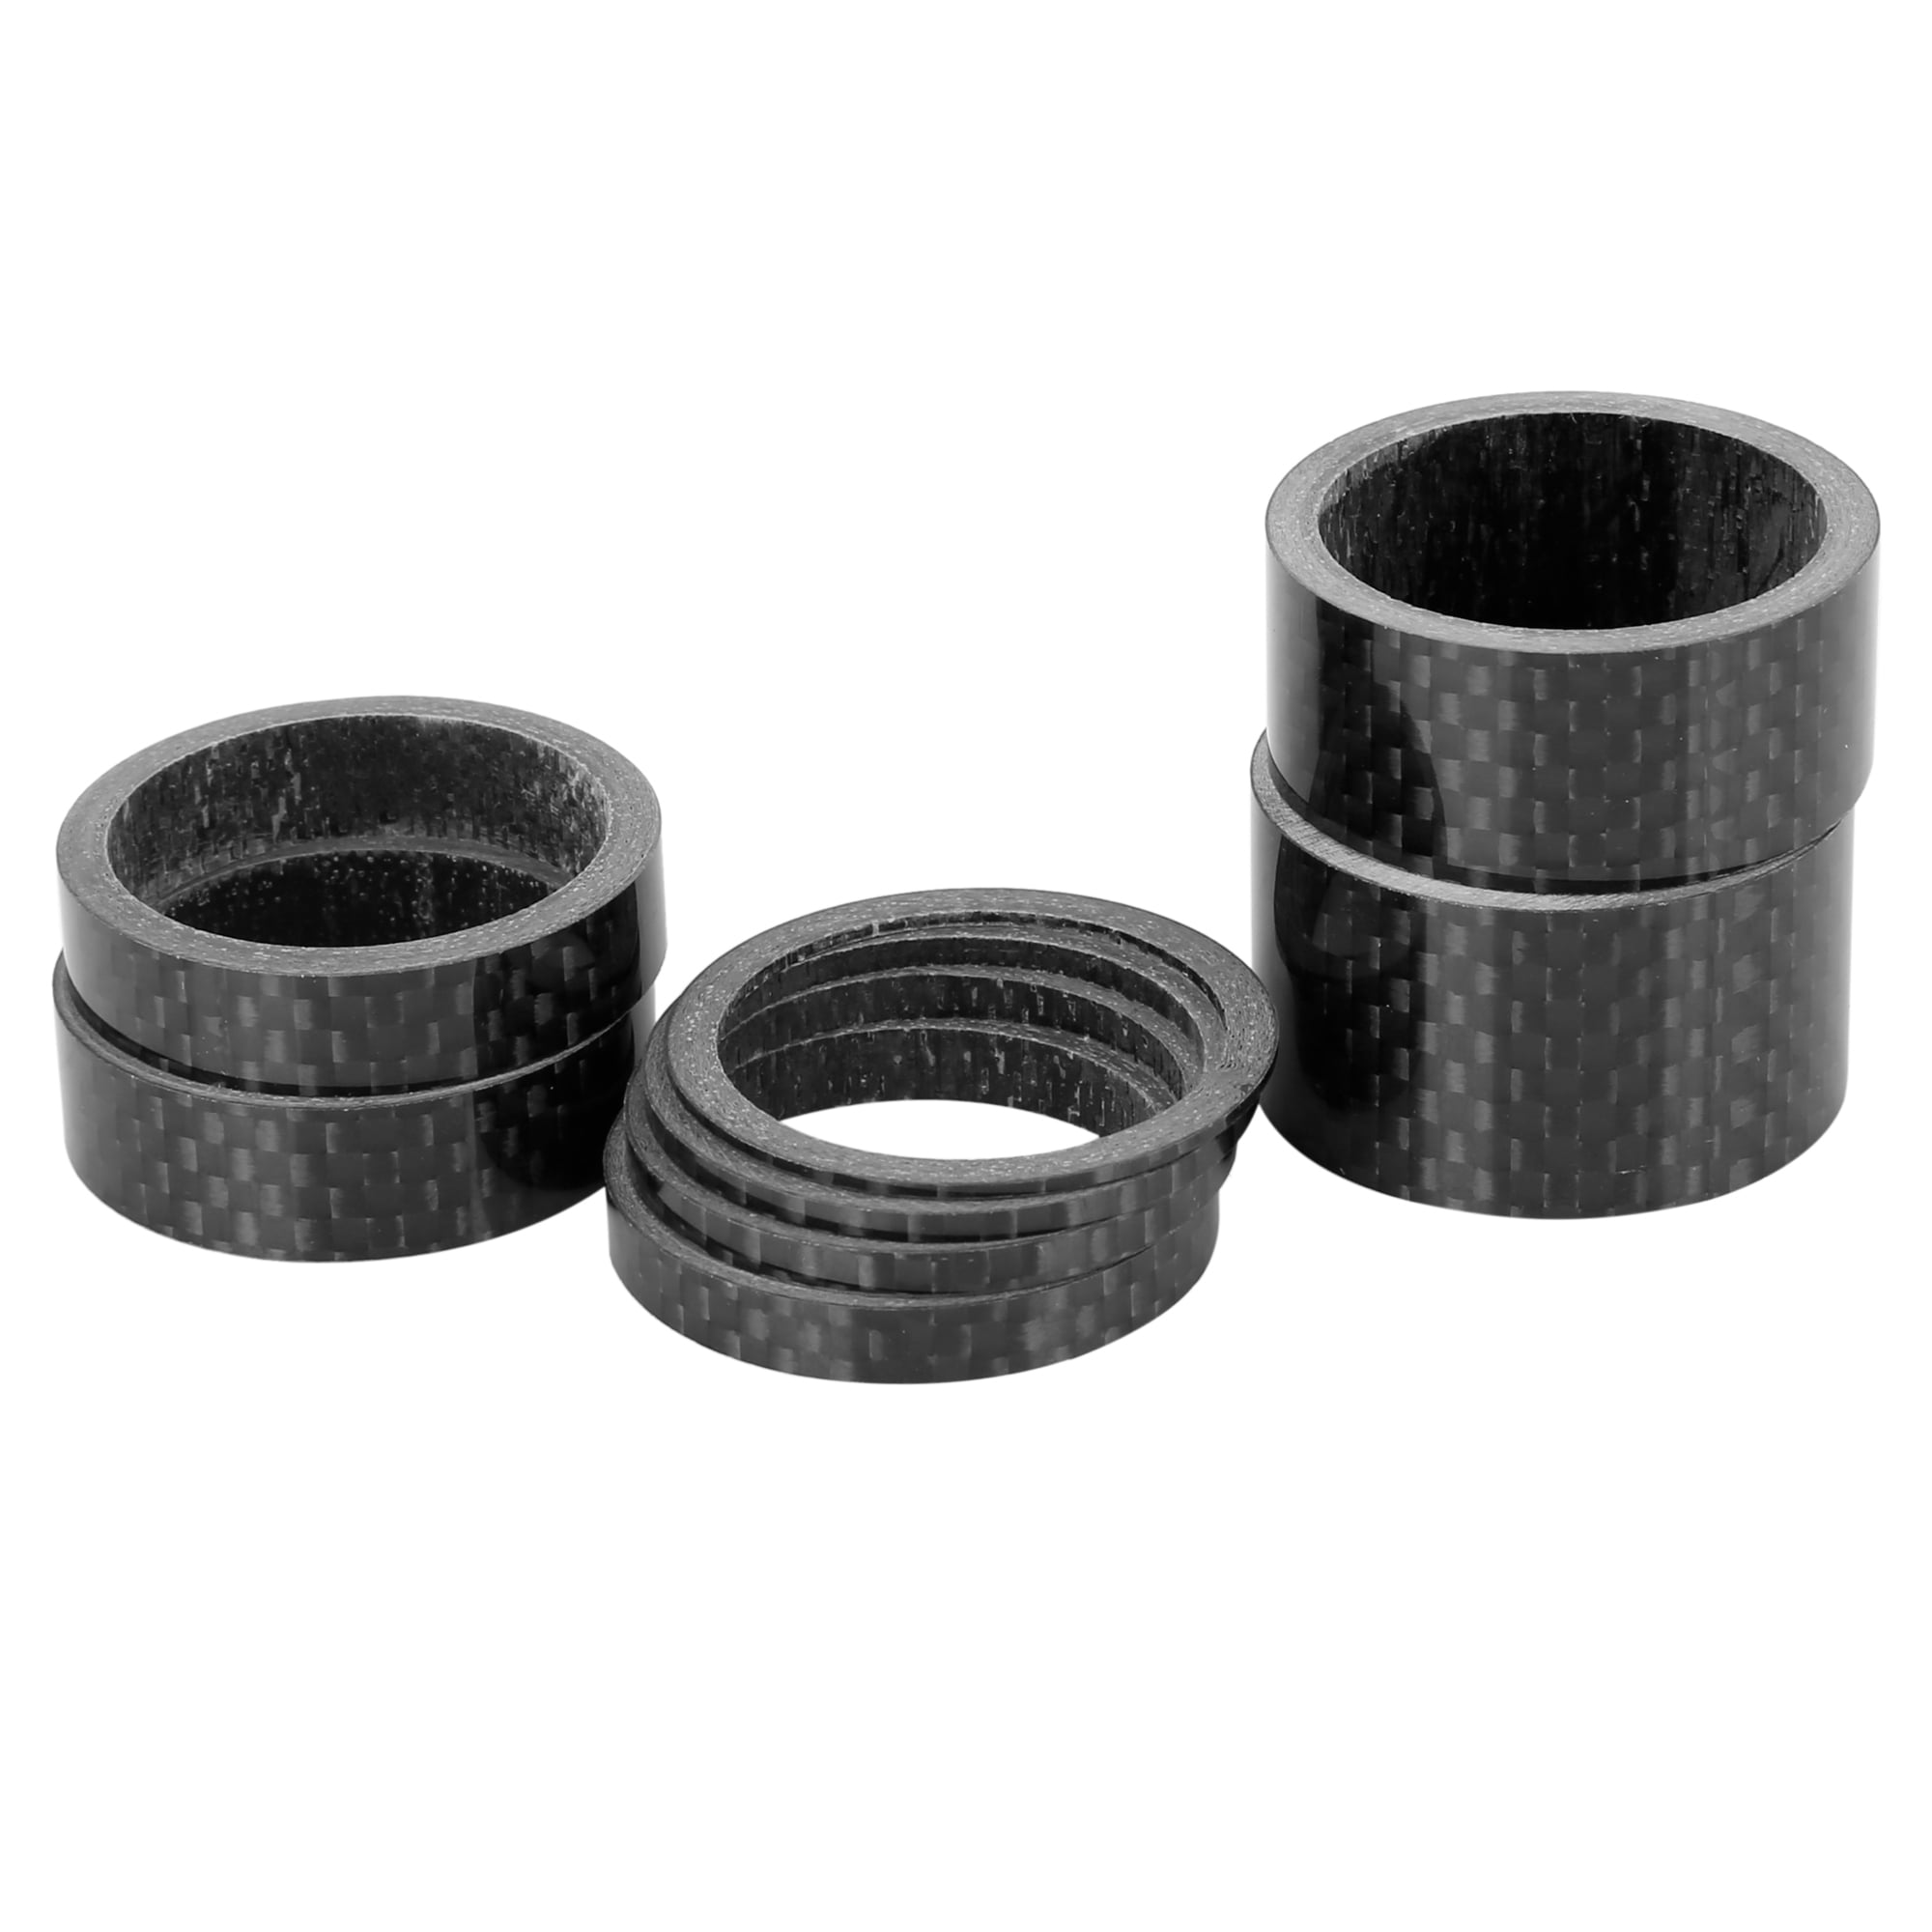 5pcs Headset Spacer Carbon Fiber Fit 1 1/8 Inch Stem for Bike Cycling 1mm 